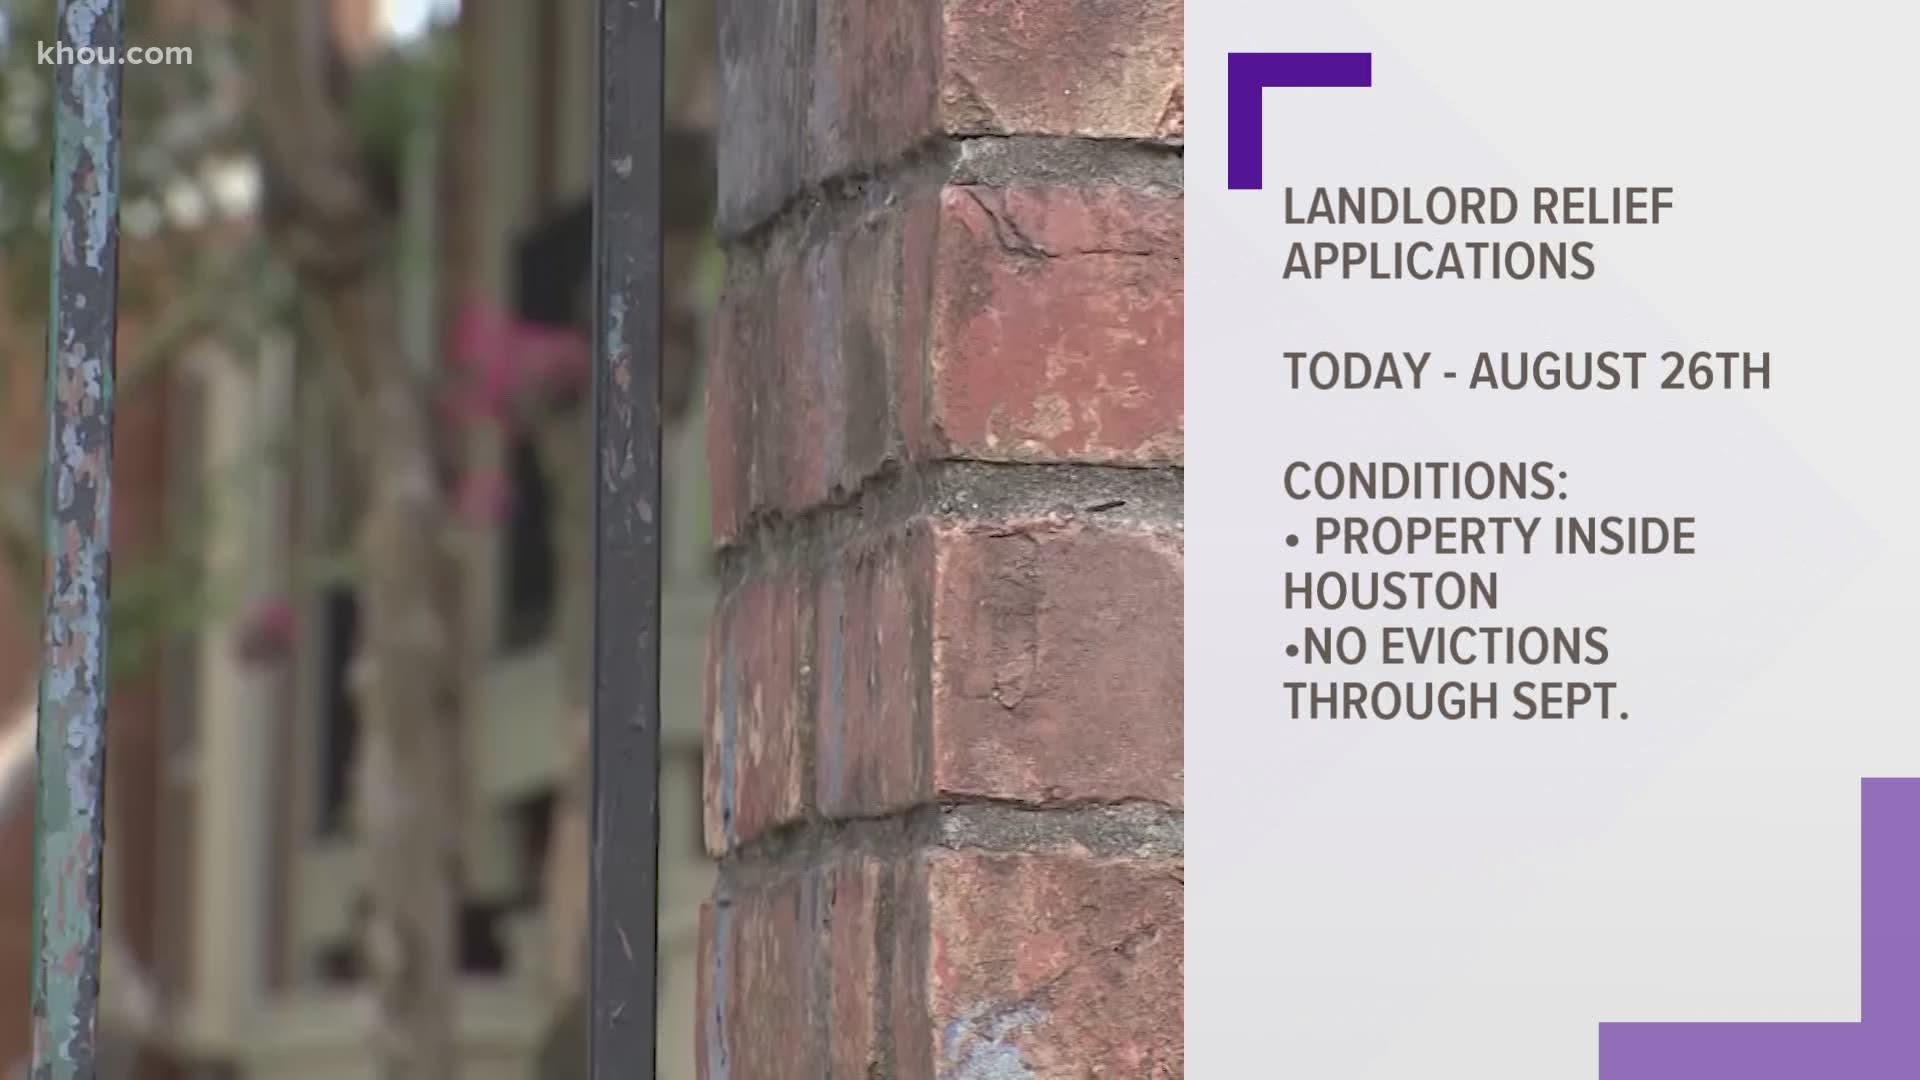 The City of Houston is offering rent relief to landlords and renters.